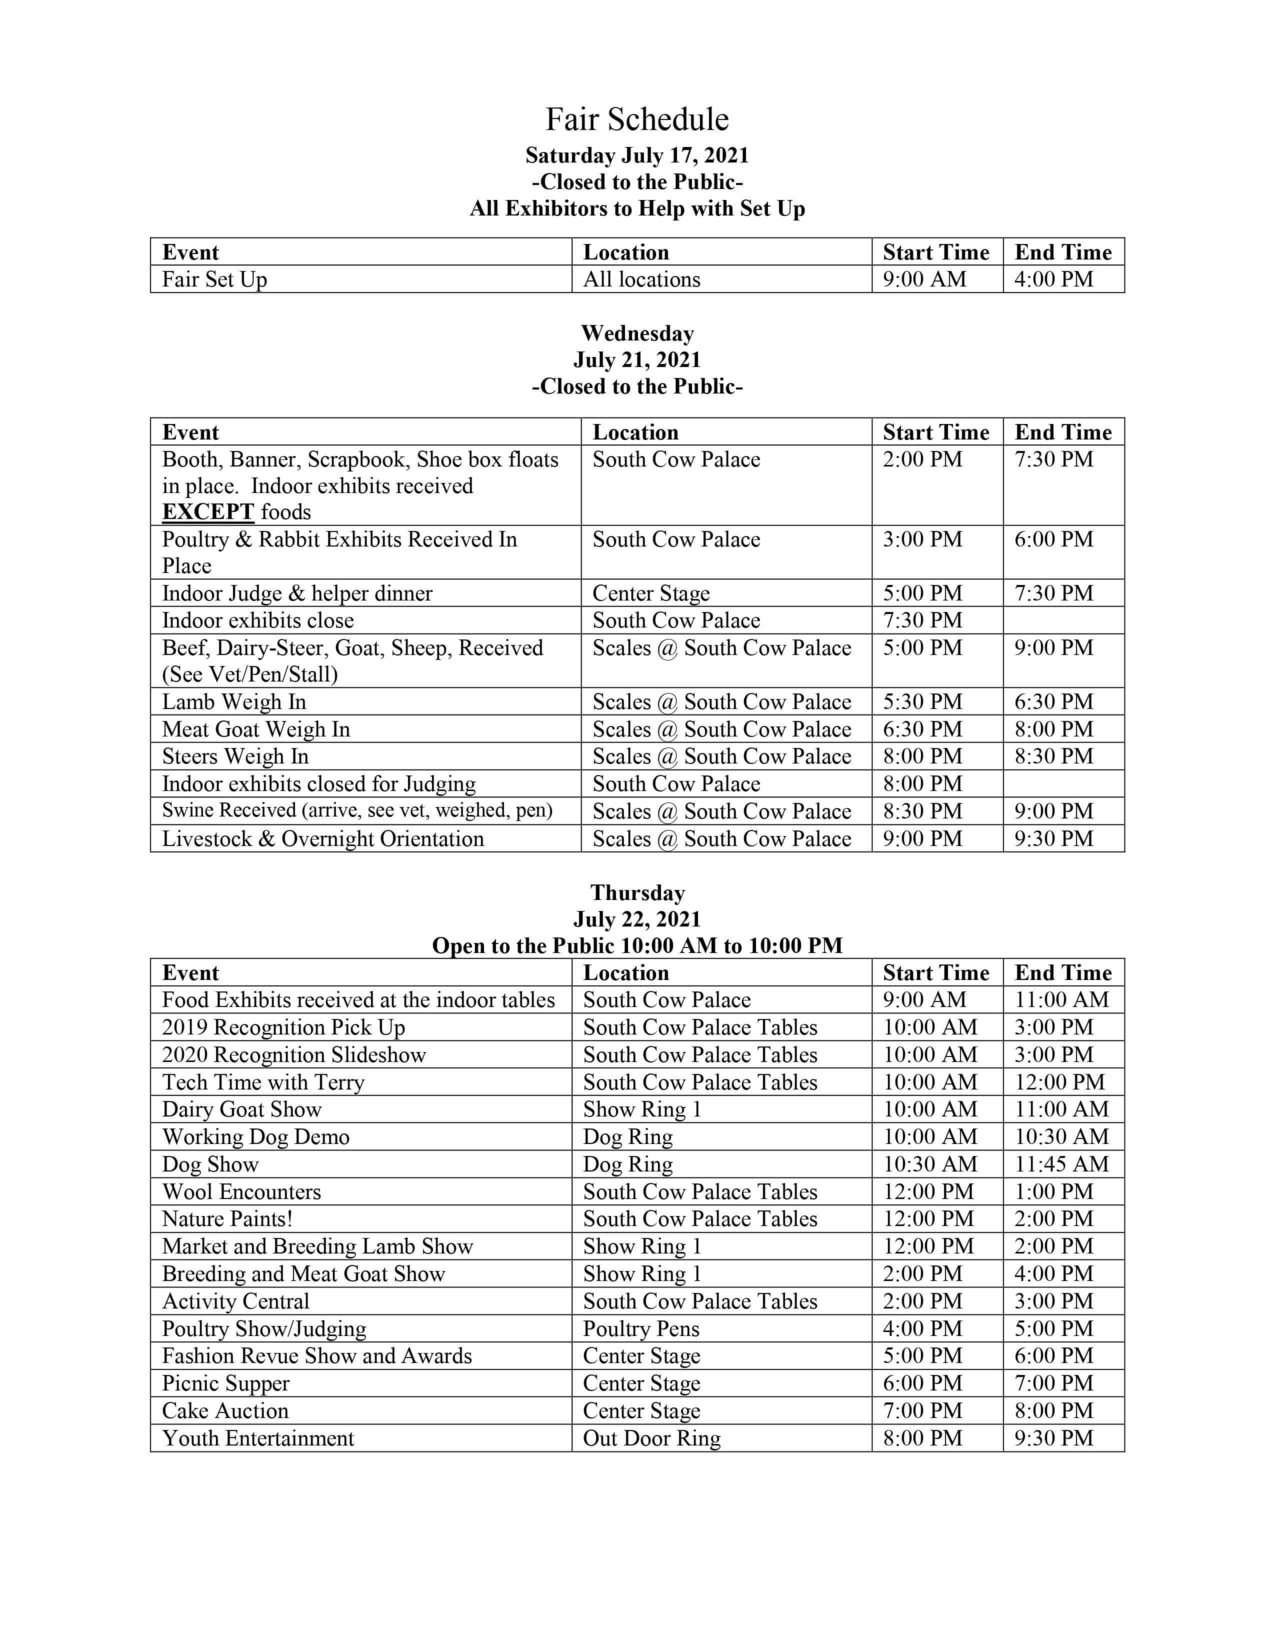 Fair Schedule_Updated 07_16_2021_PAGE1_RESIZED Baltimore County 4H Fair